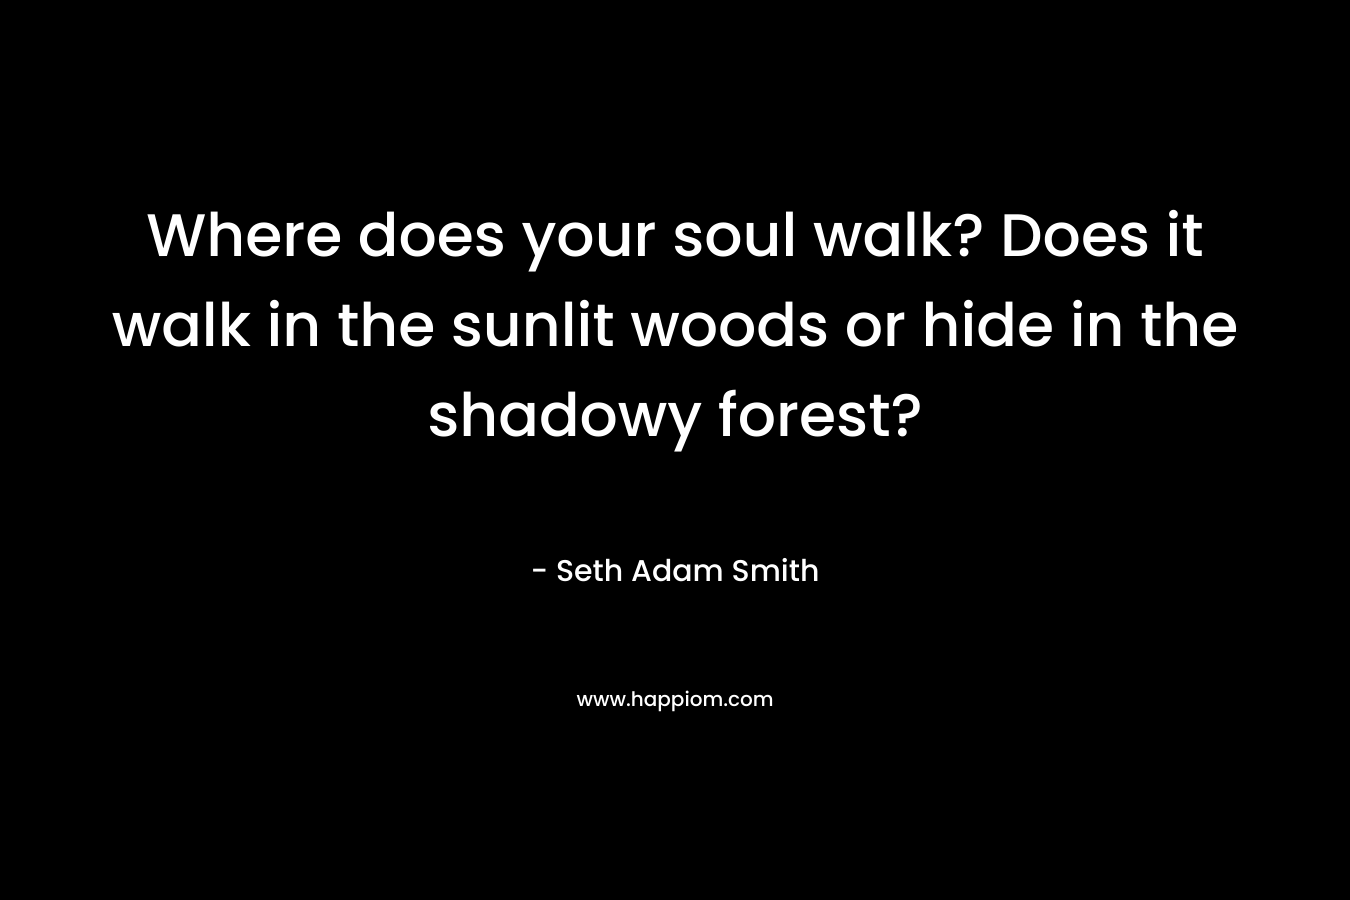 Where does your soul walk? Does it walk in the sunlit woods or hide in the shadowy forest?